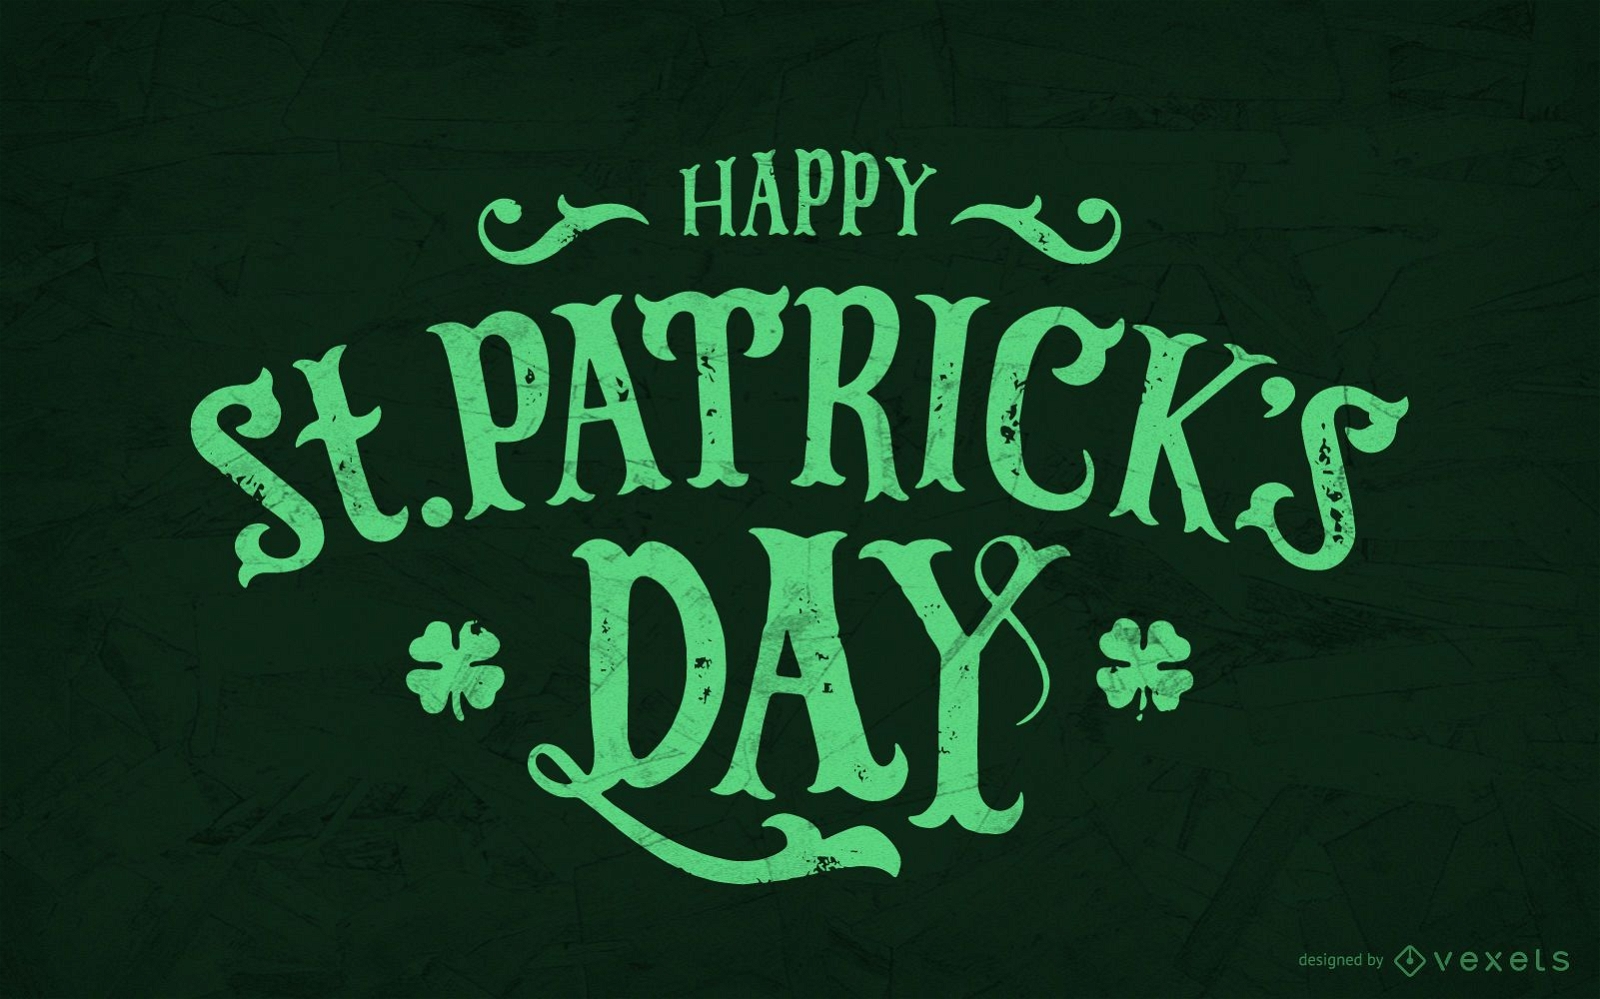 Happy St. Patrick's Day lettering